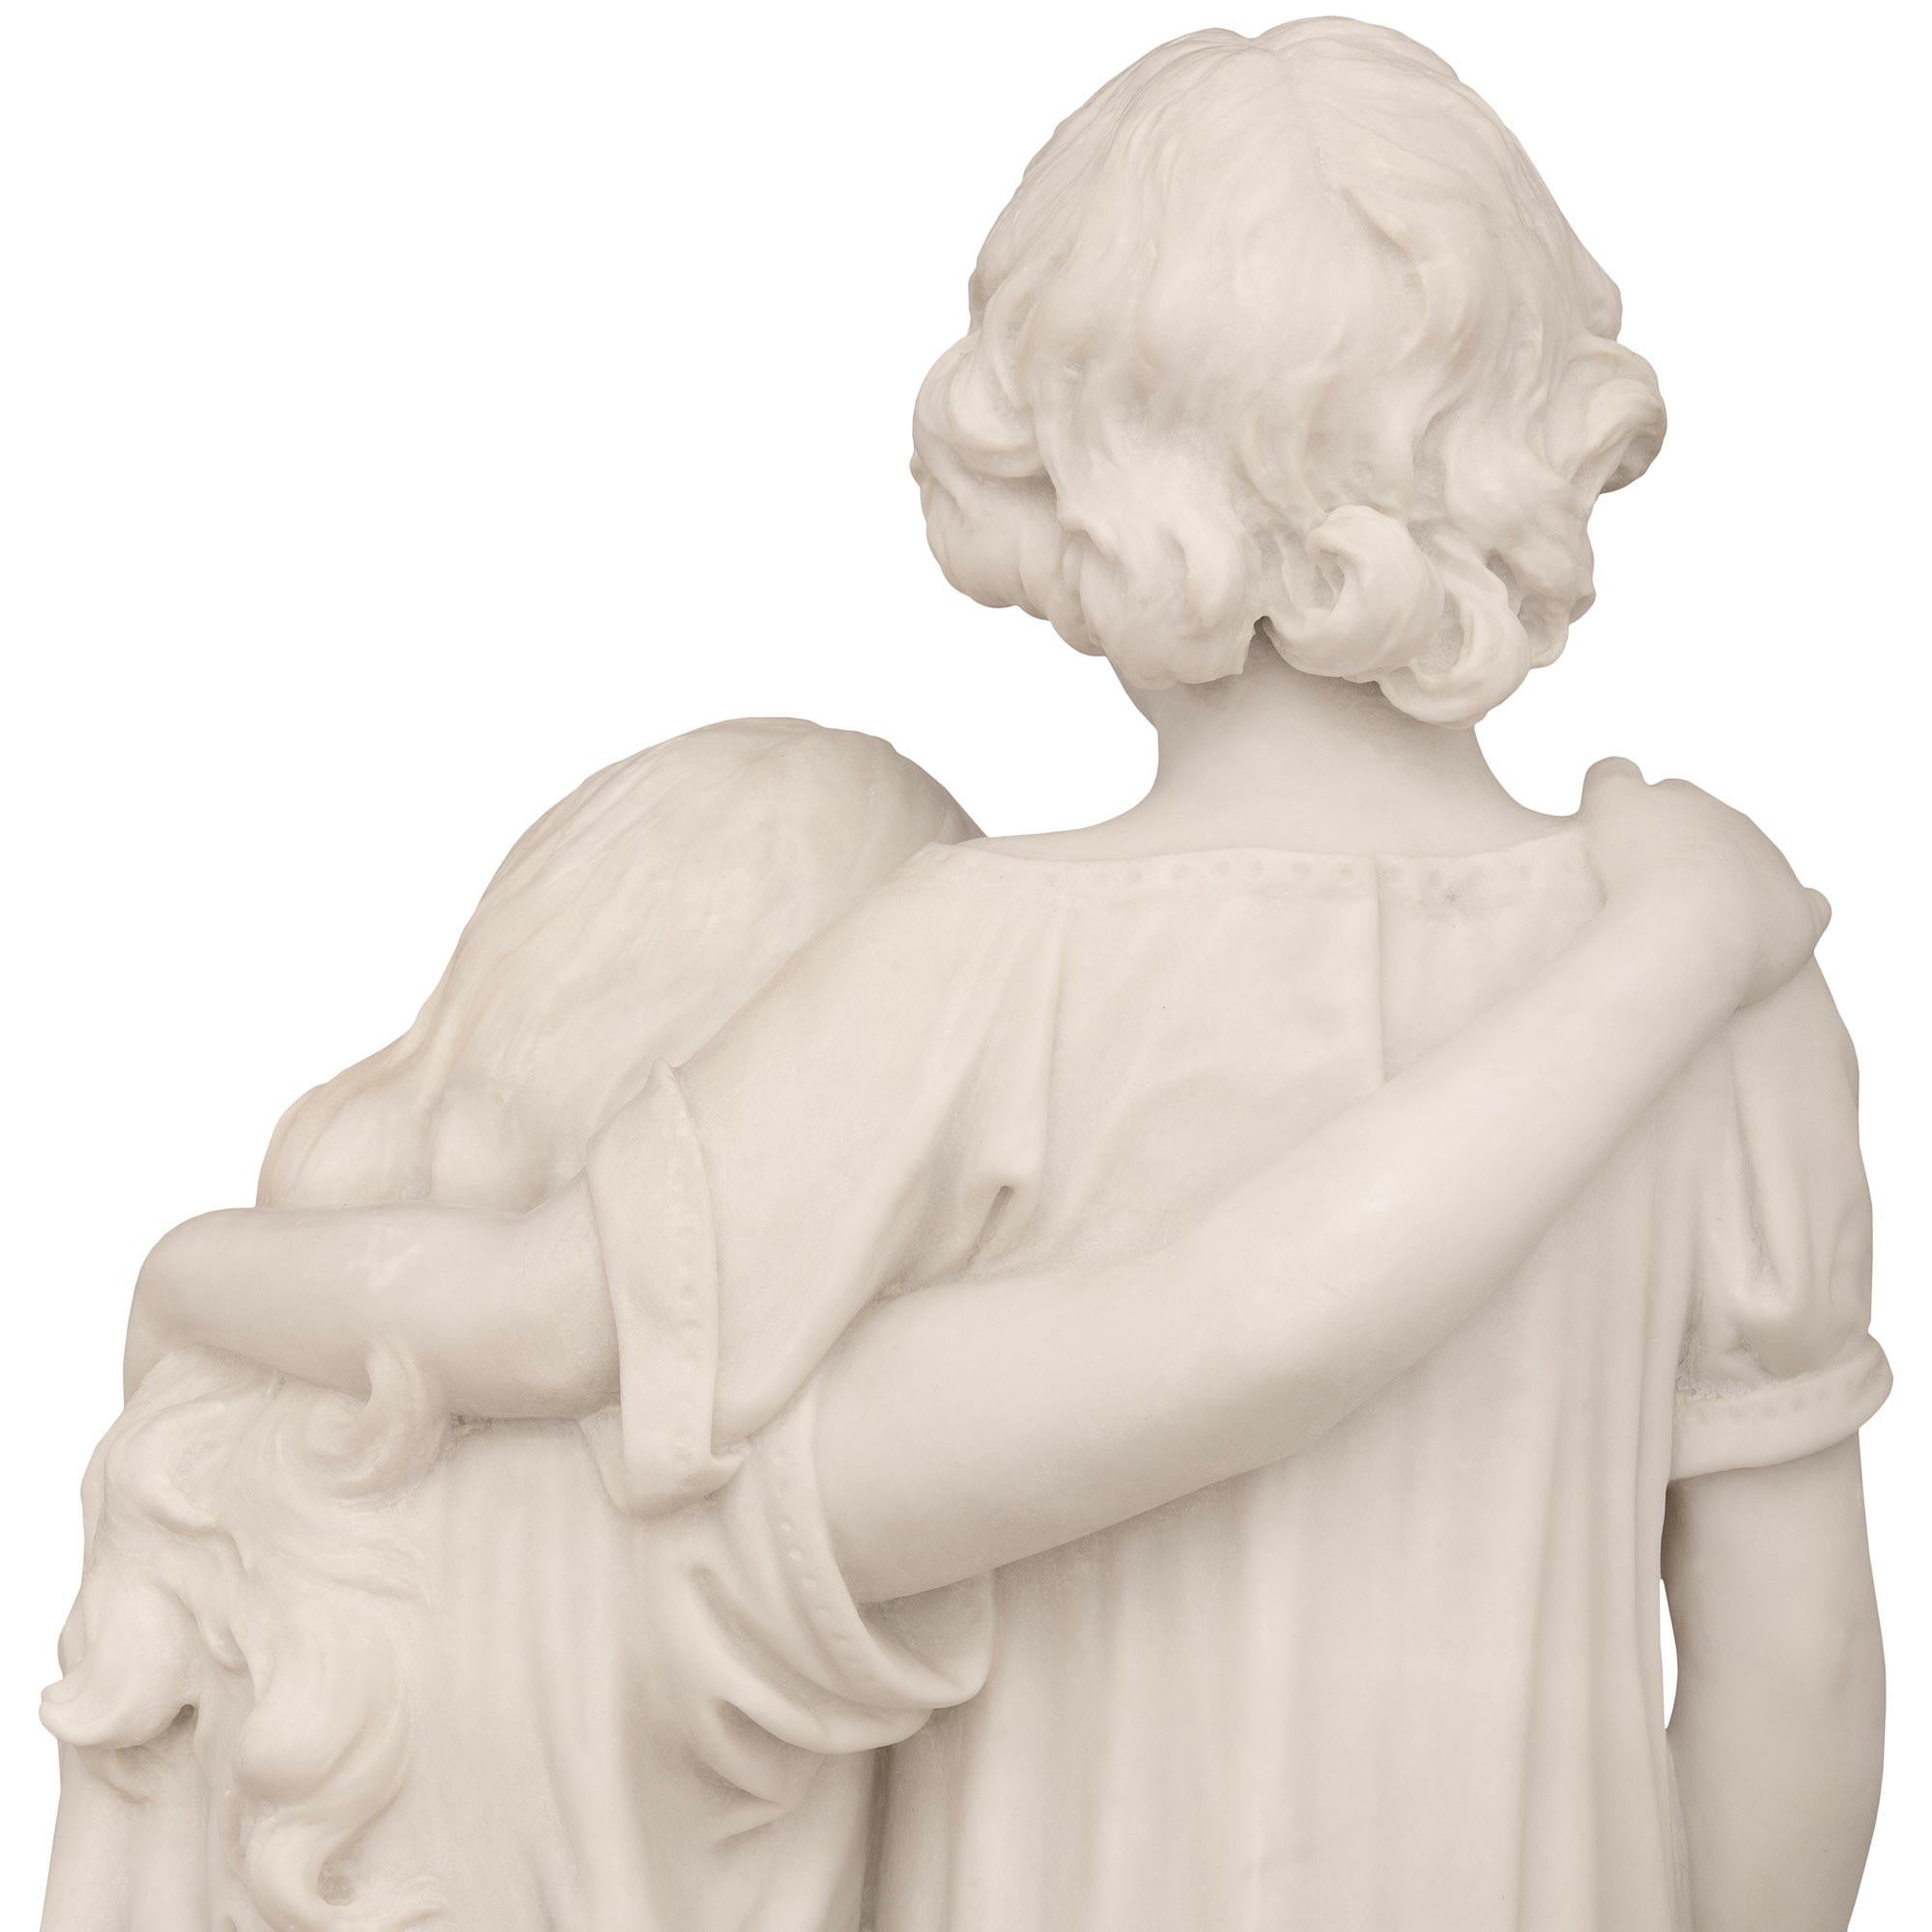 Italian 19th Century Marble Statue Of A Brother And Sister At The Seashore For Sale 4